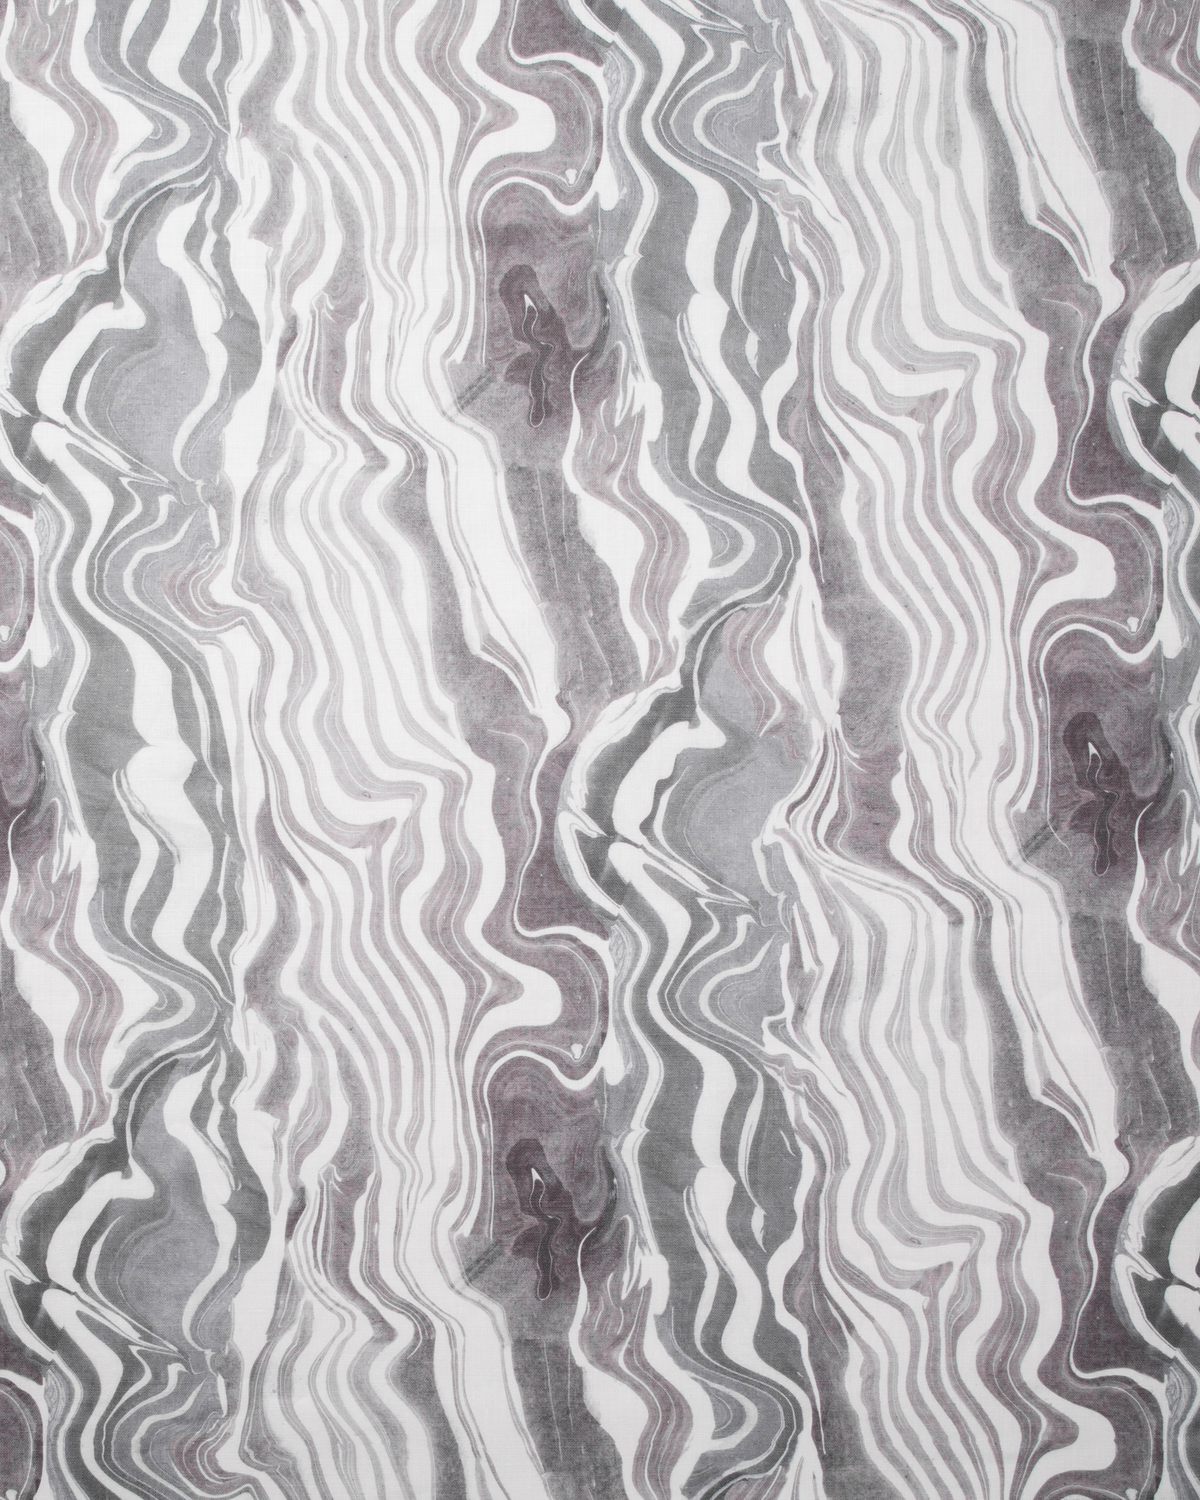 Marbled Stripe Fabric in Gray-Lilac